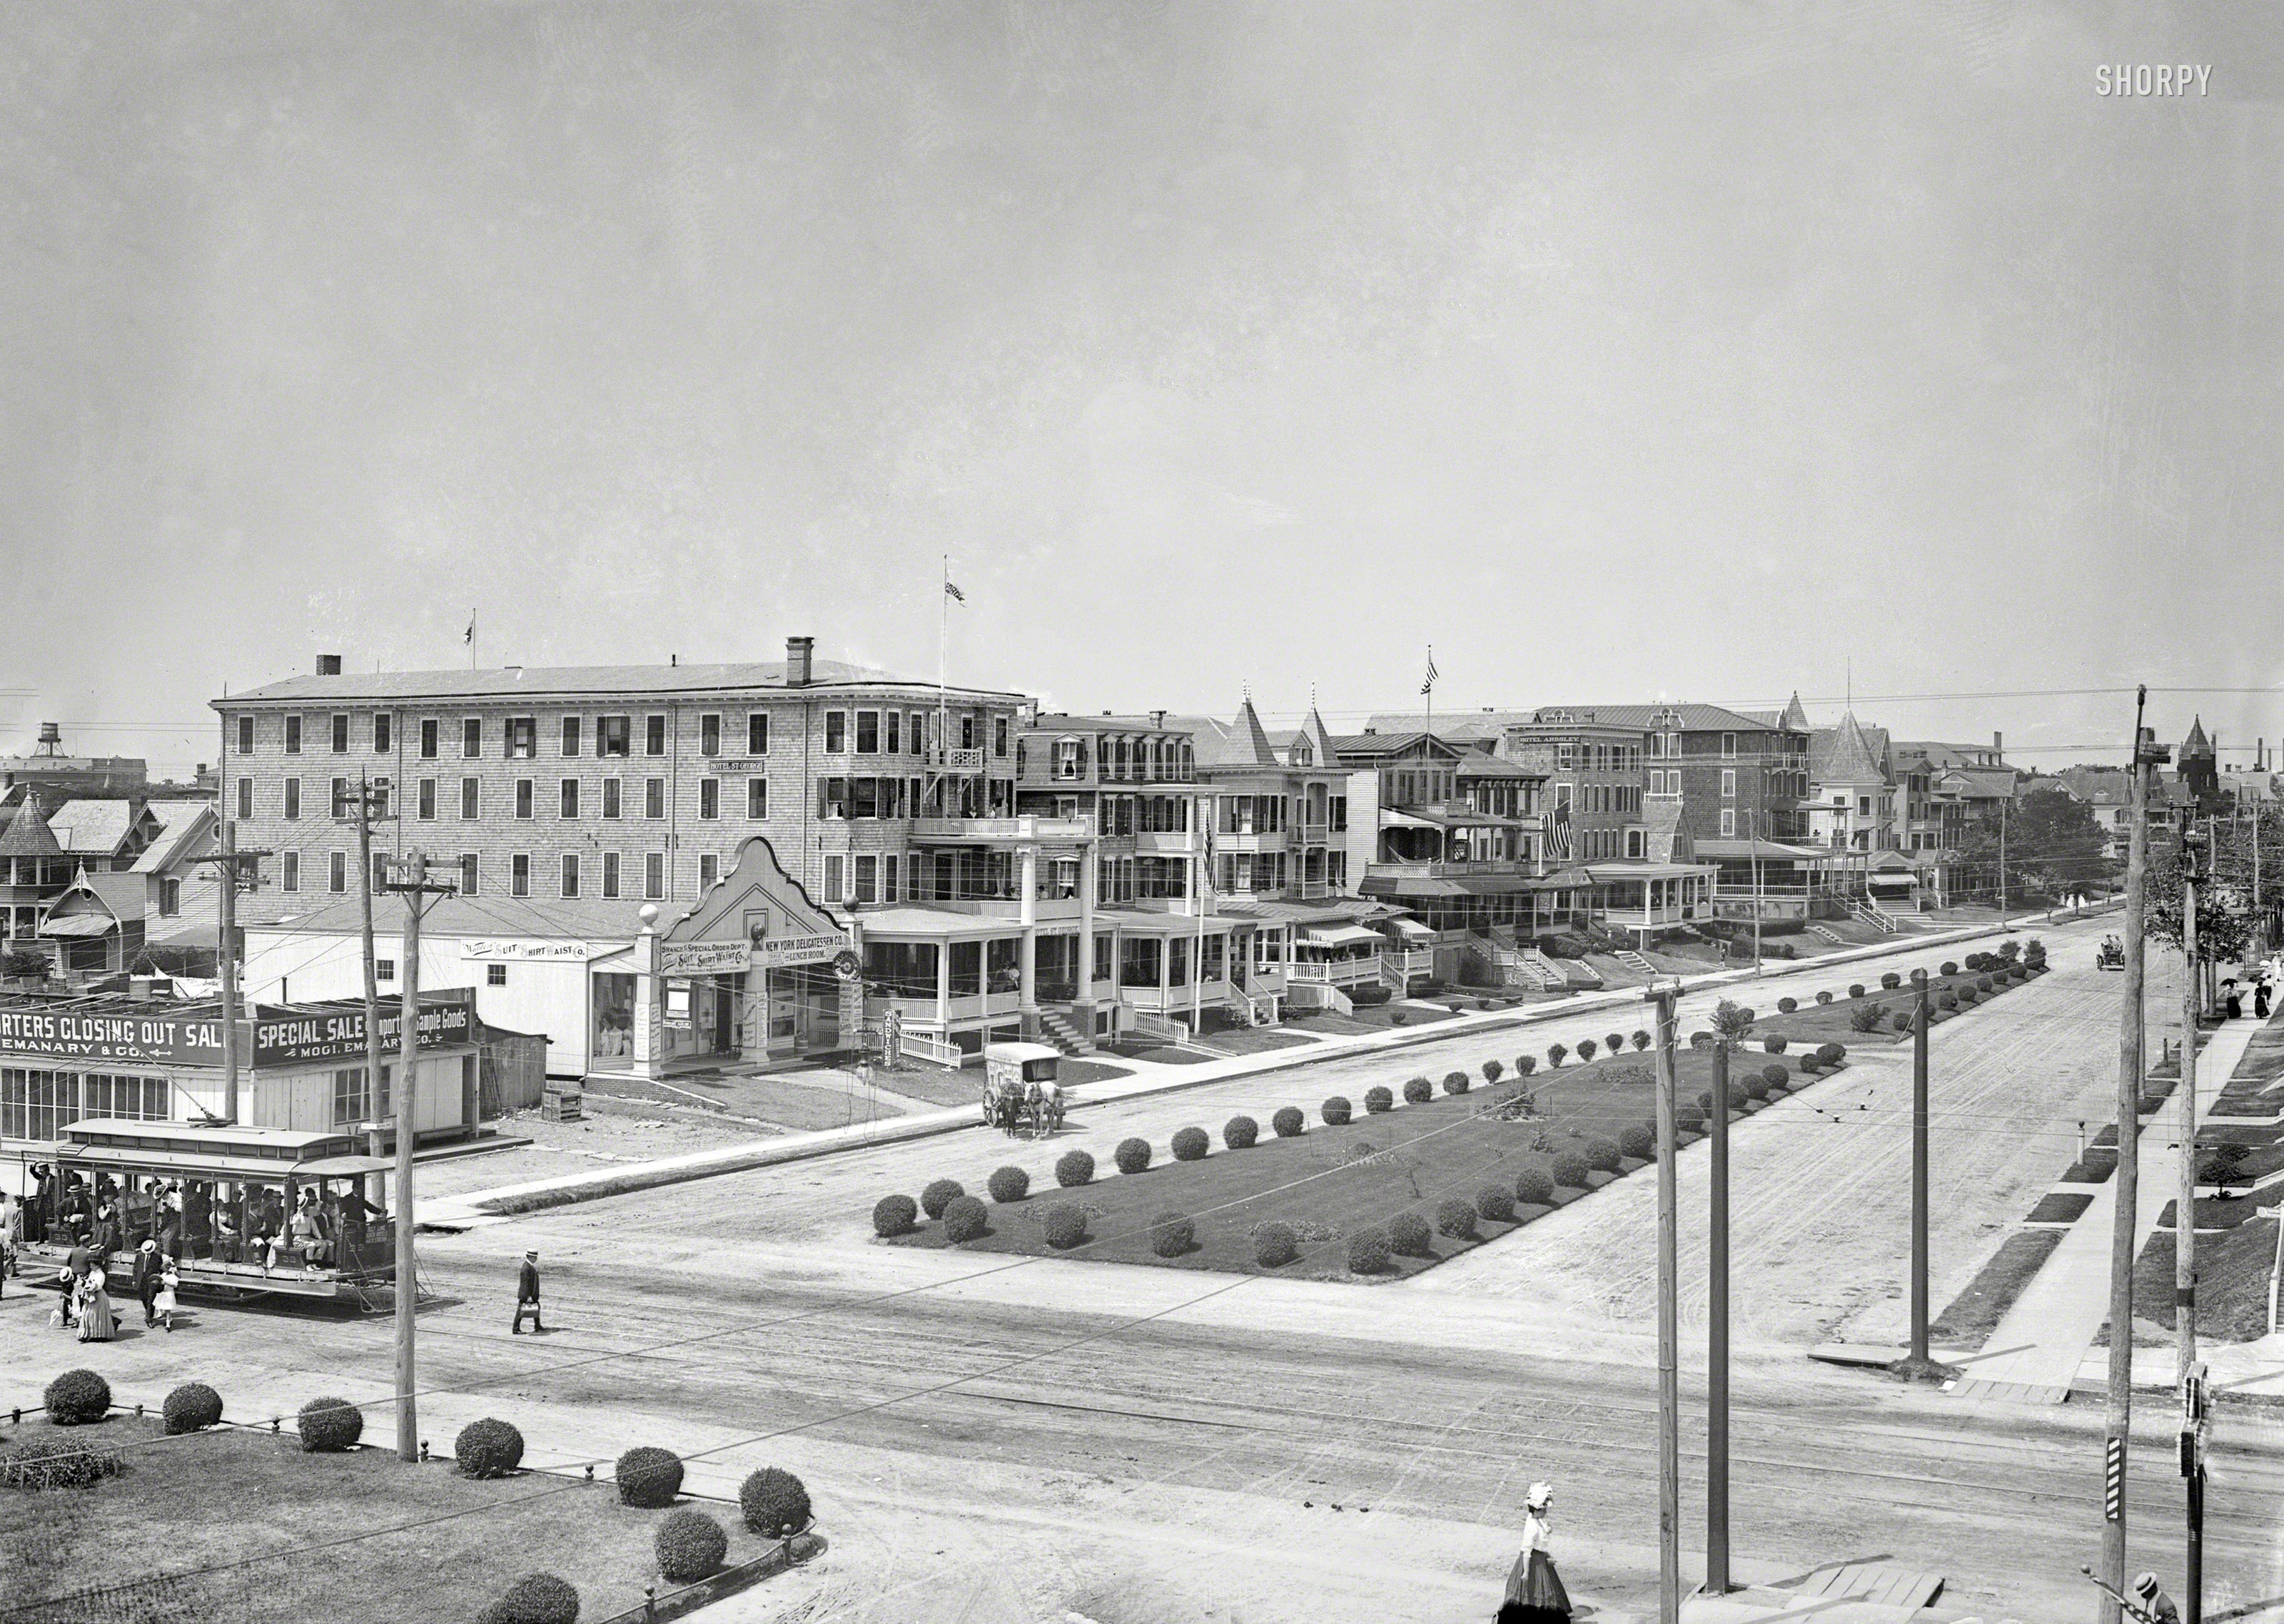 July 1911. "Street scene, 2nd Avenue, Asbury Park." Greetings from this pleasant setting for the ice wagon, streetcar, sandwich shop and resort hotels. 5x7 glass negative, George Grantham Bain Collection. View full size.